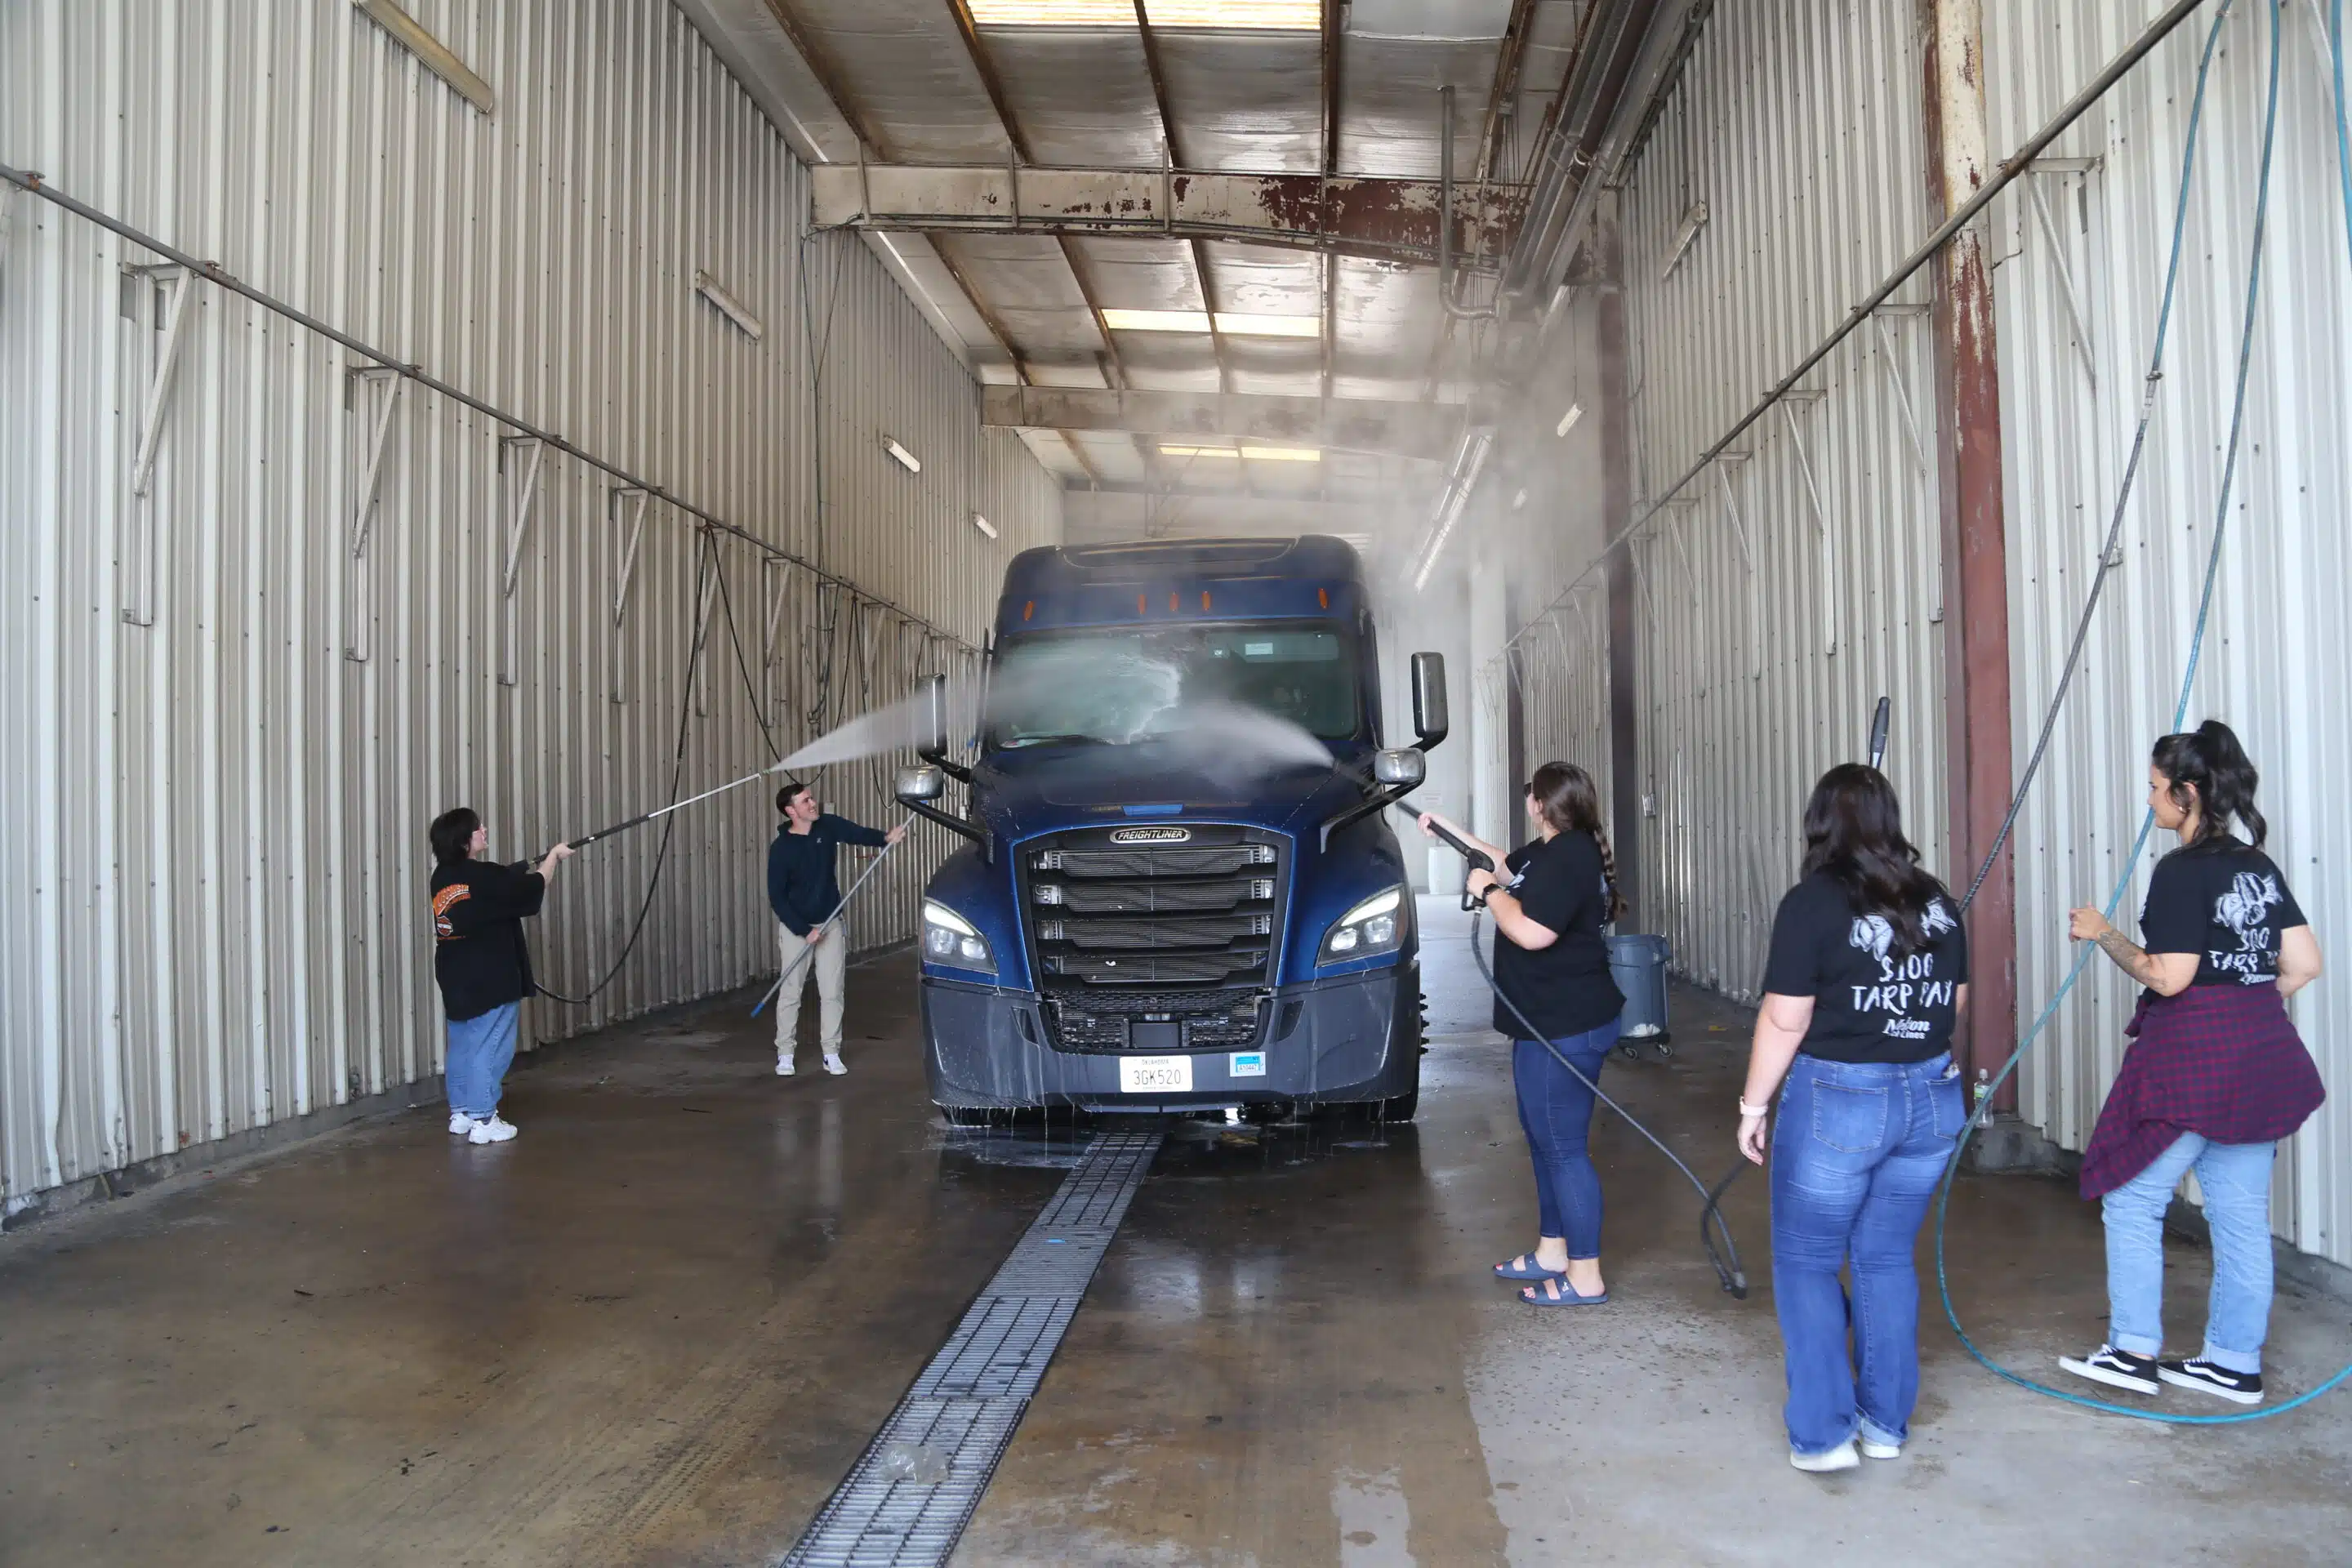 Melton employees washing a truck in the wash bay.